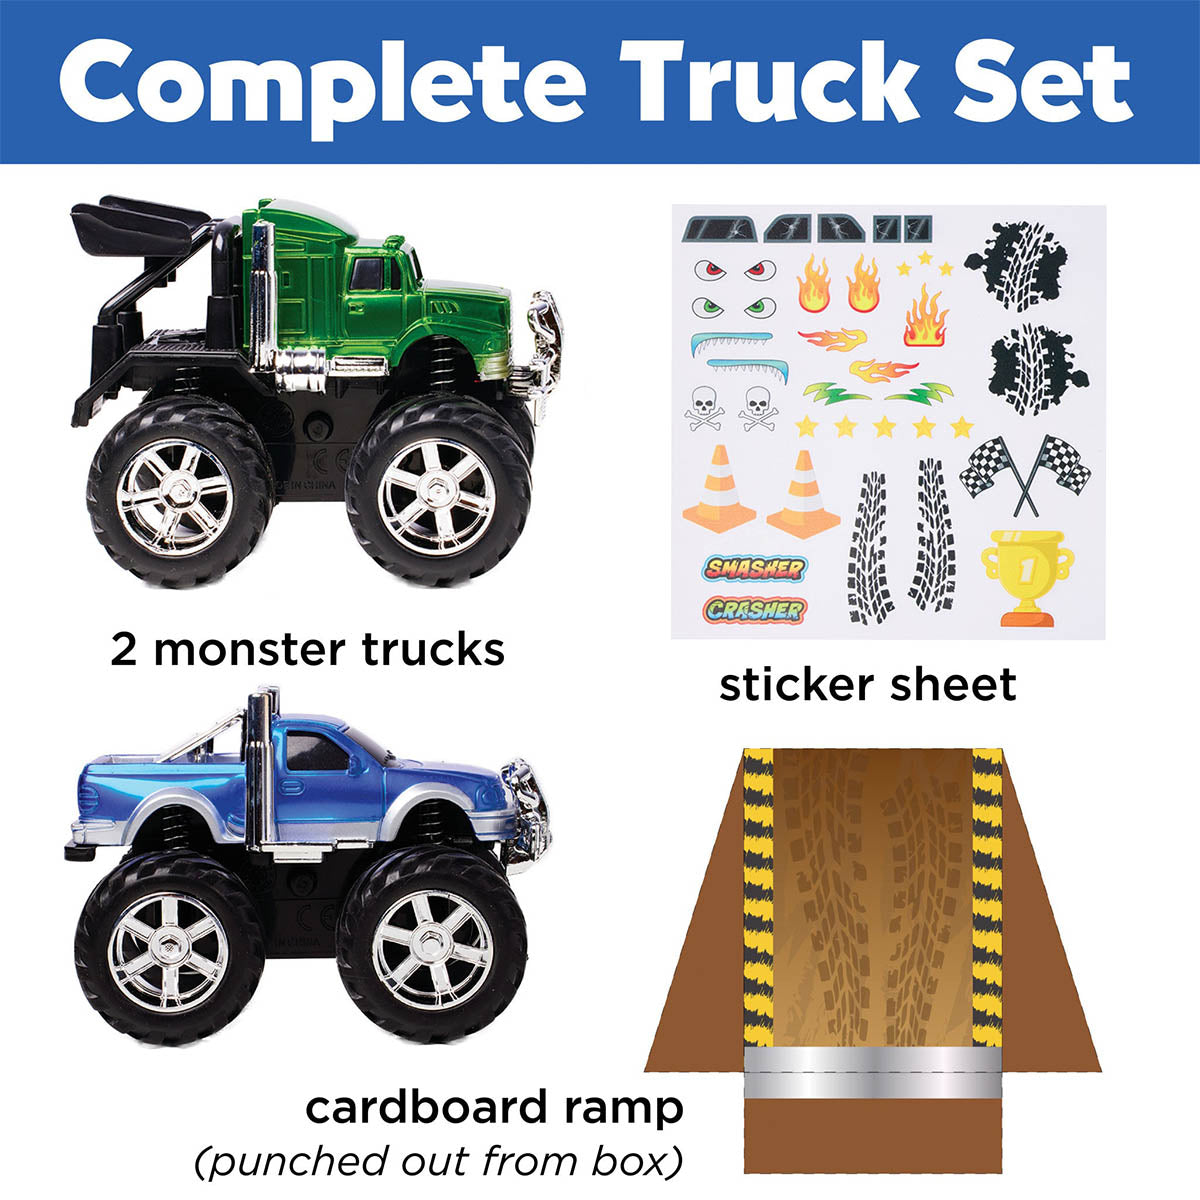 Contents for Monster Trucks by Creativity for Kids.